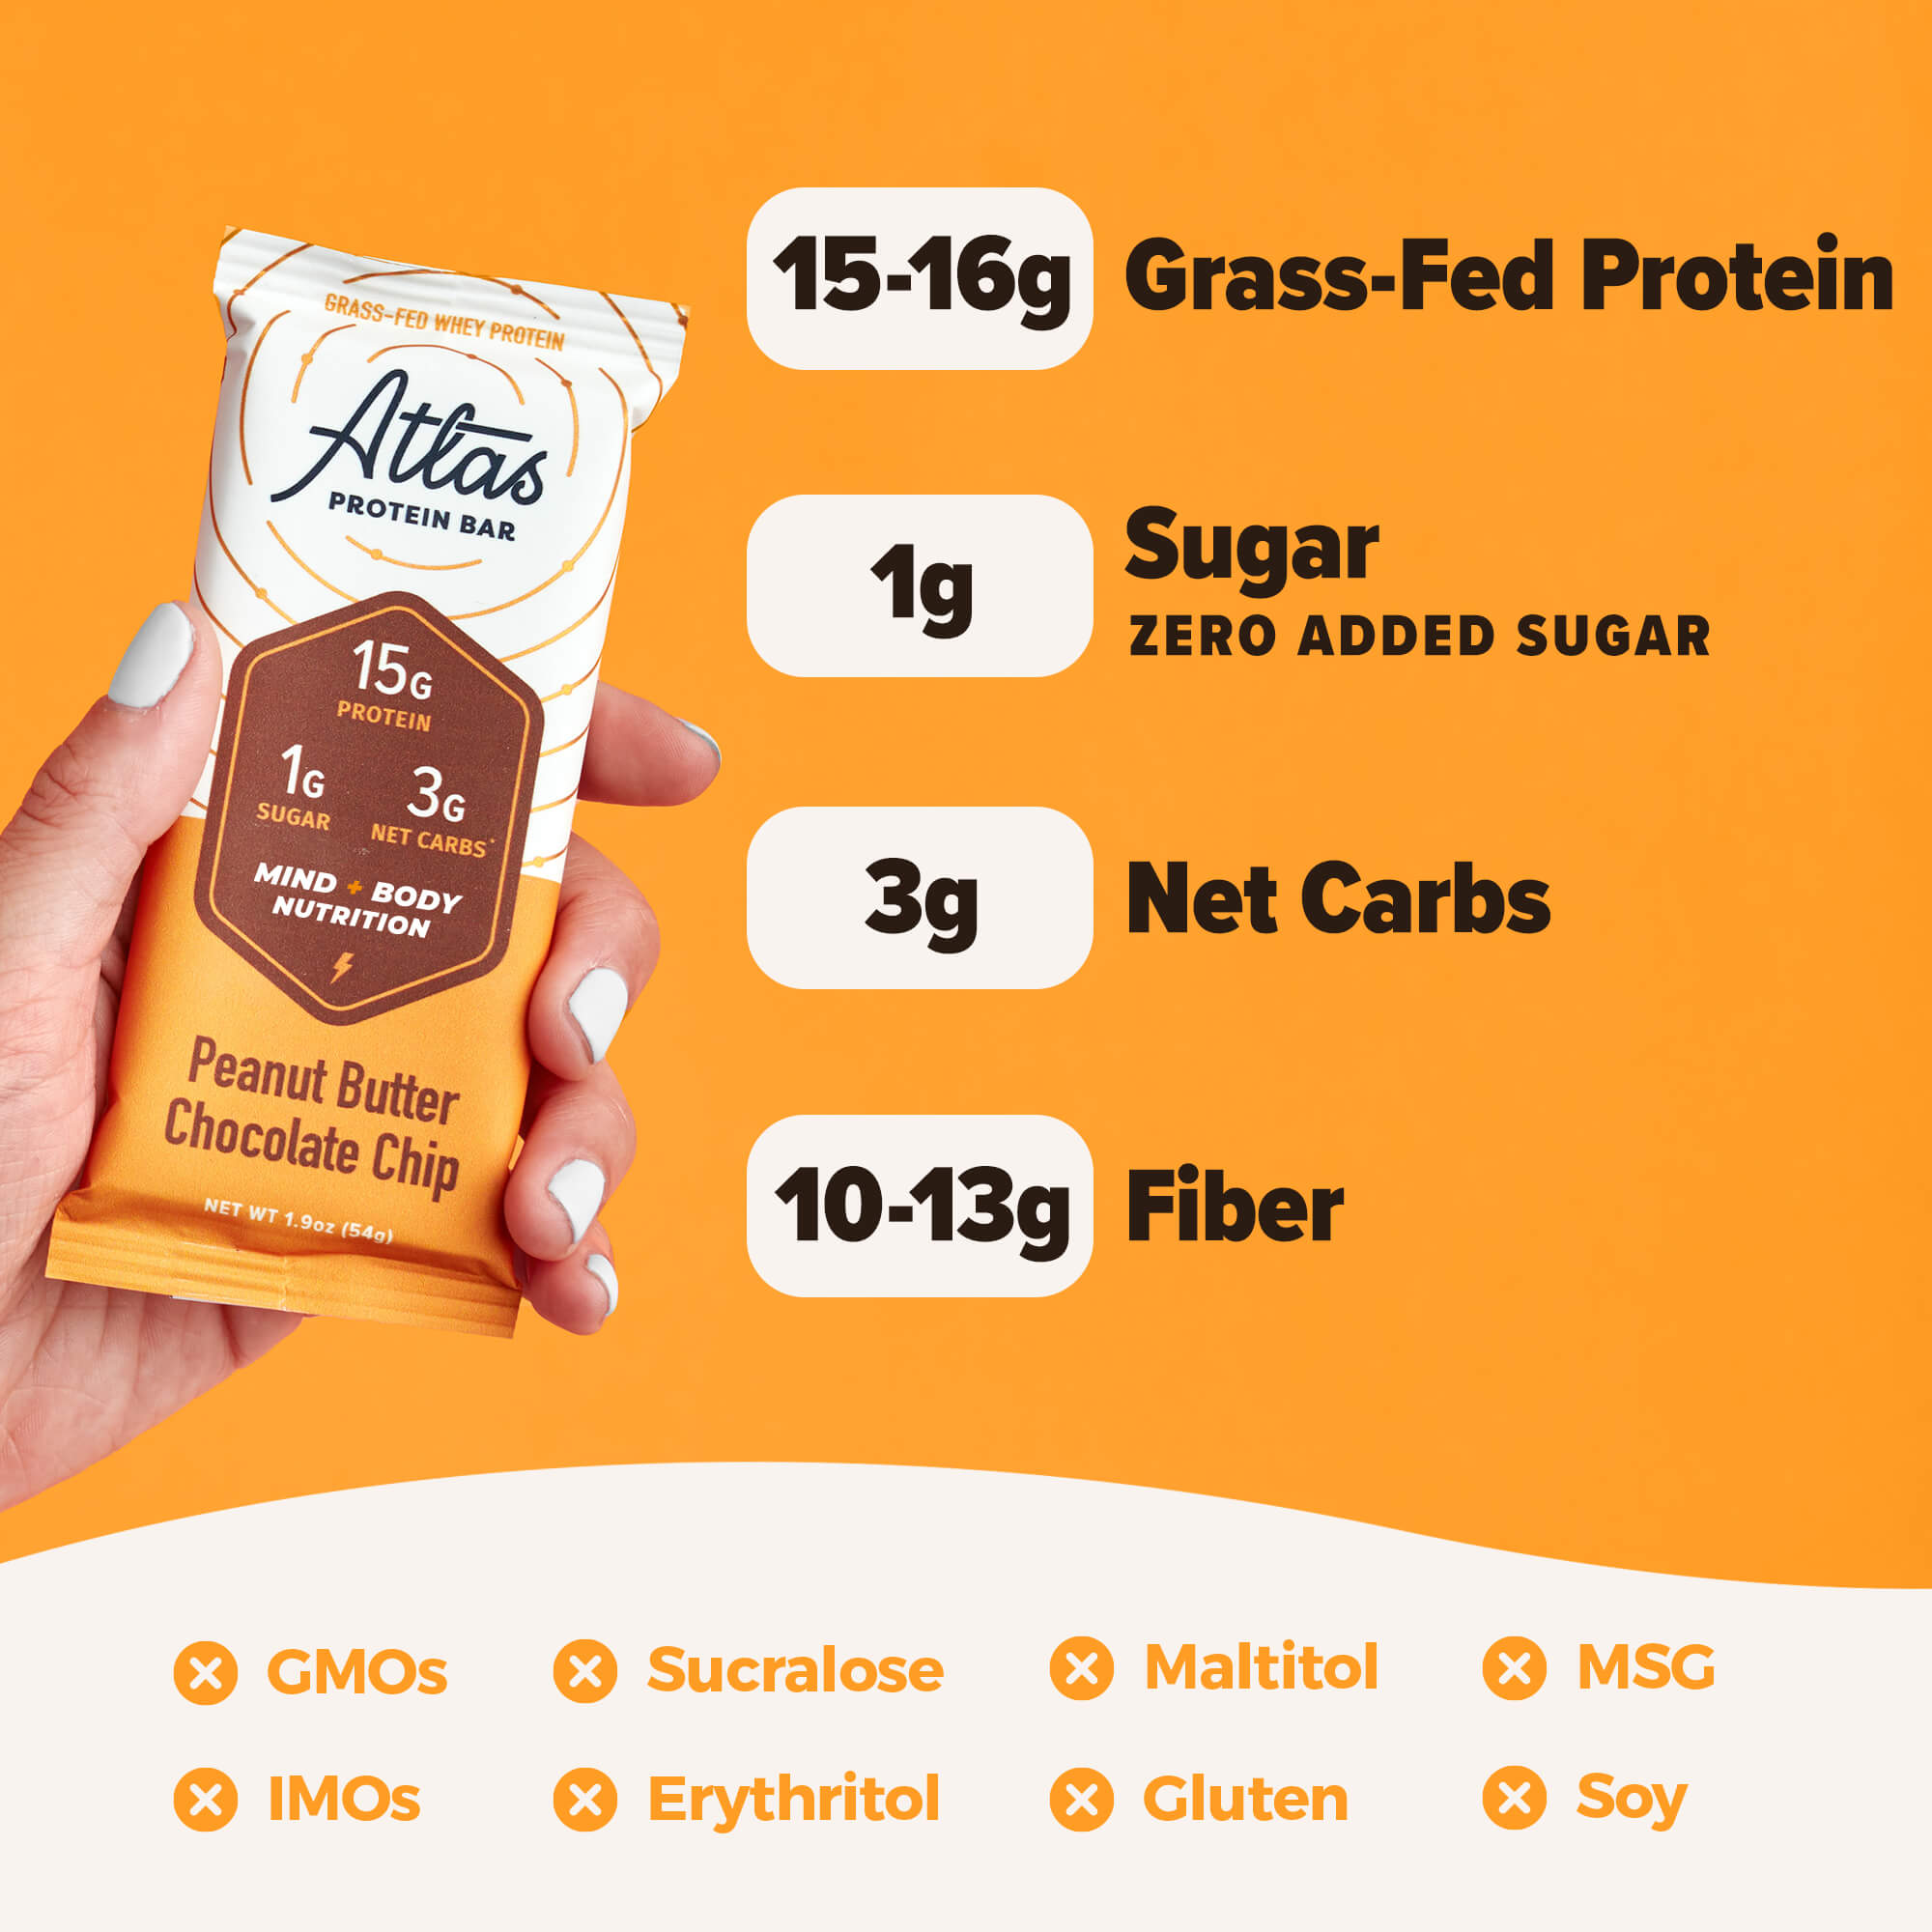 Atlas Bar, Keto Friendly & Grass Fed Whey Protein Bar, Variety Pack, 15g Protein, 9 Bars - image 4 of 9